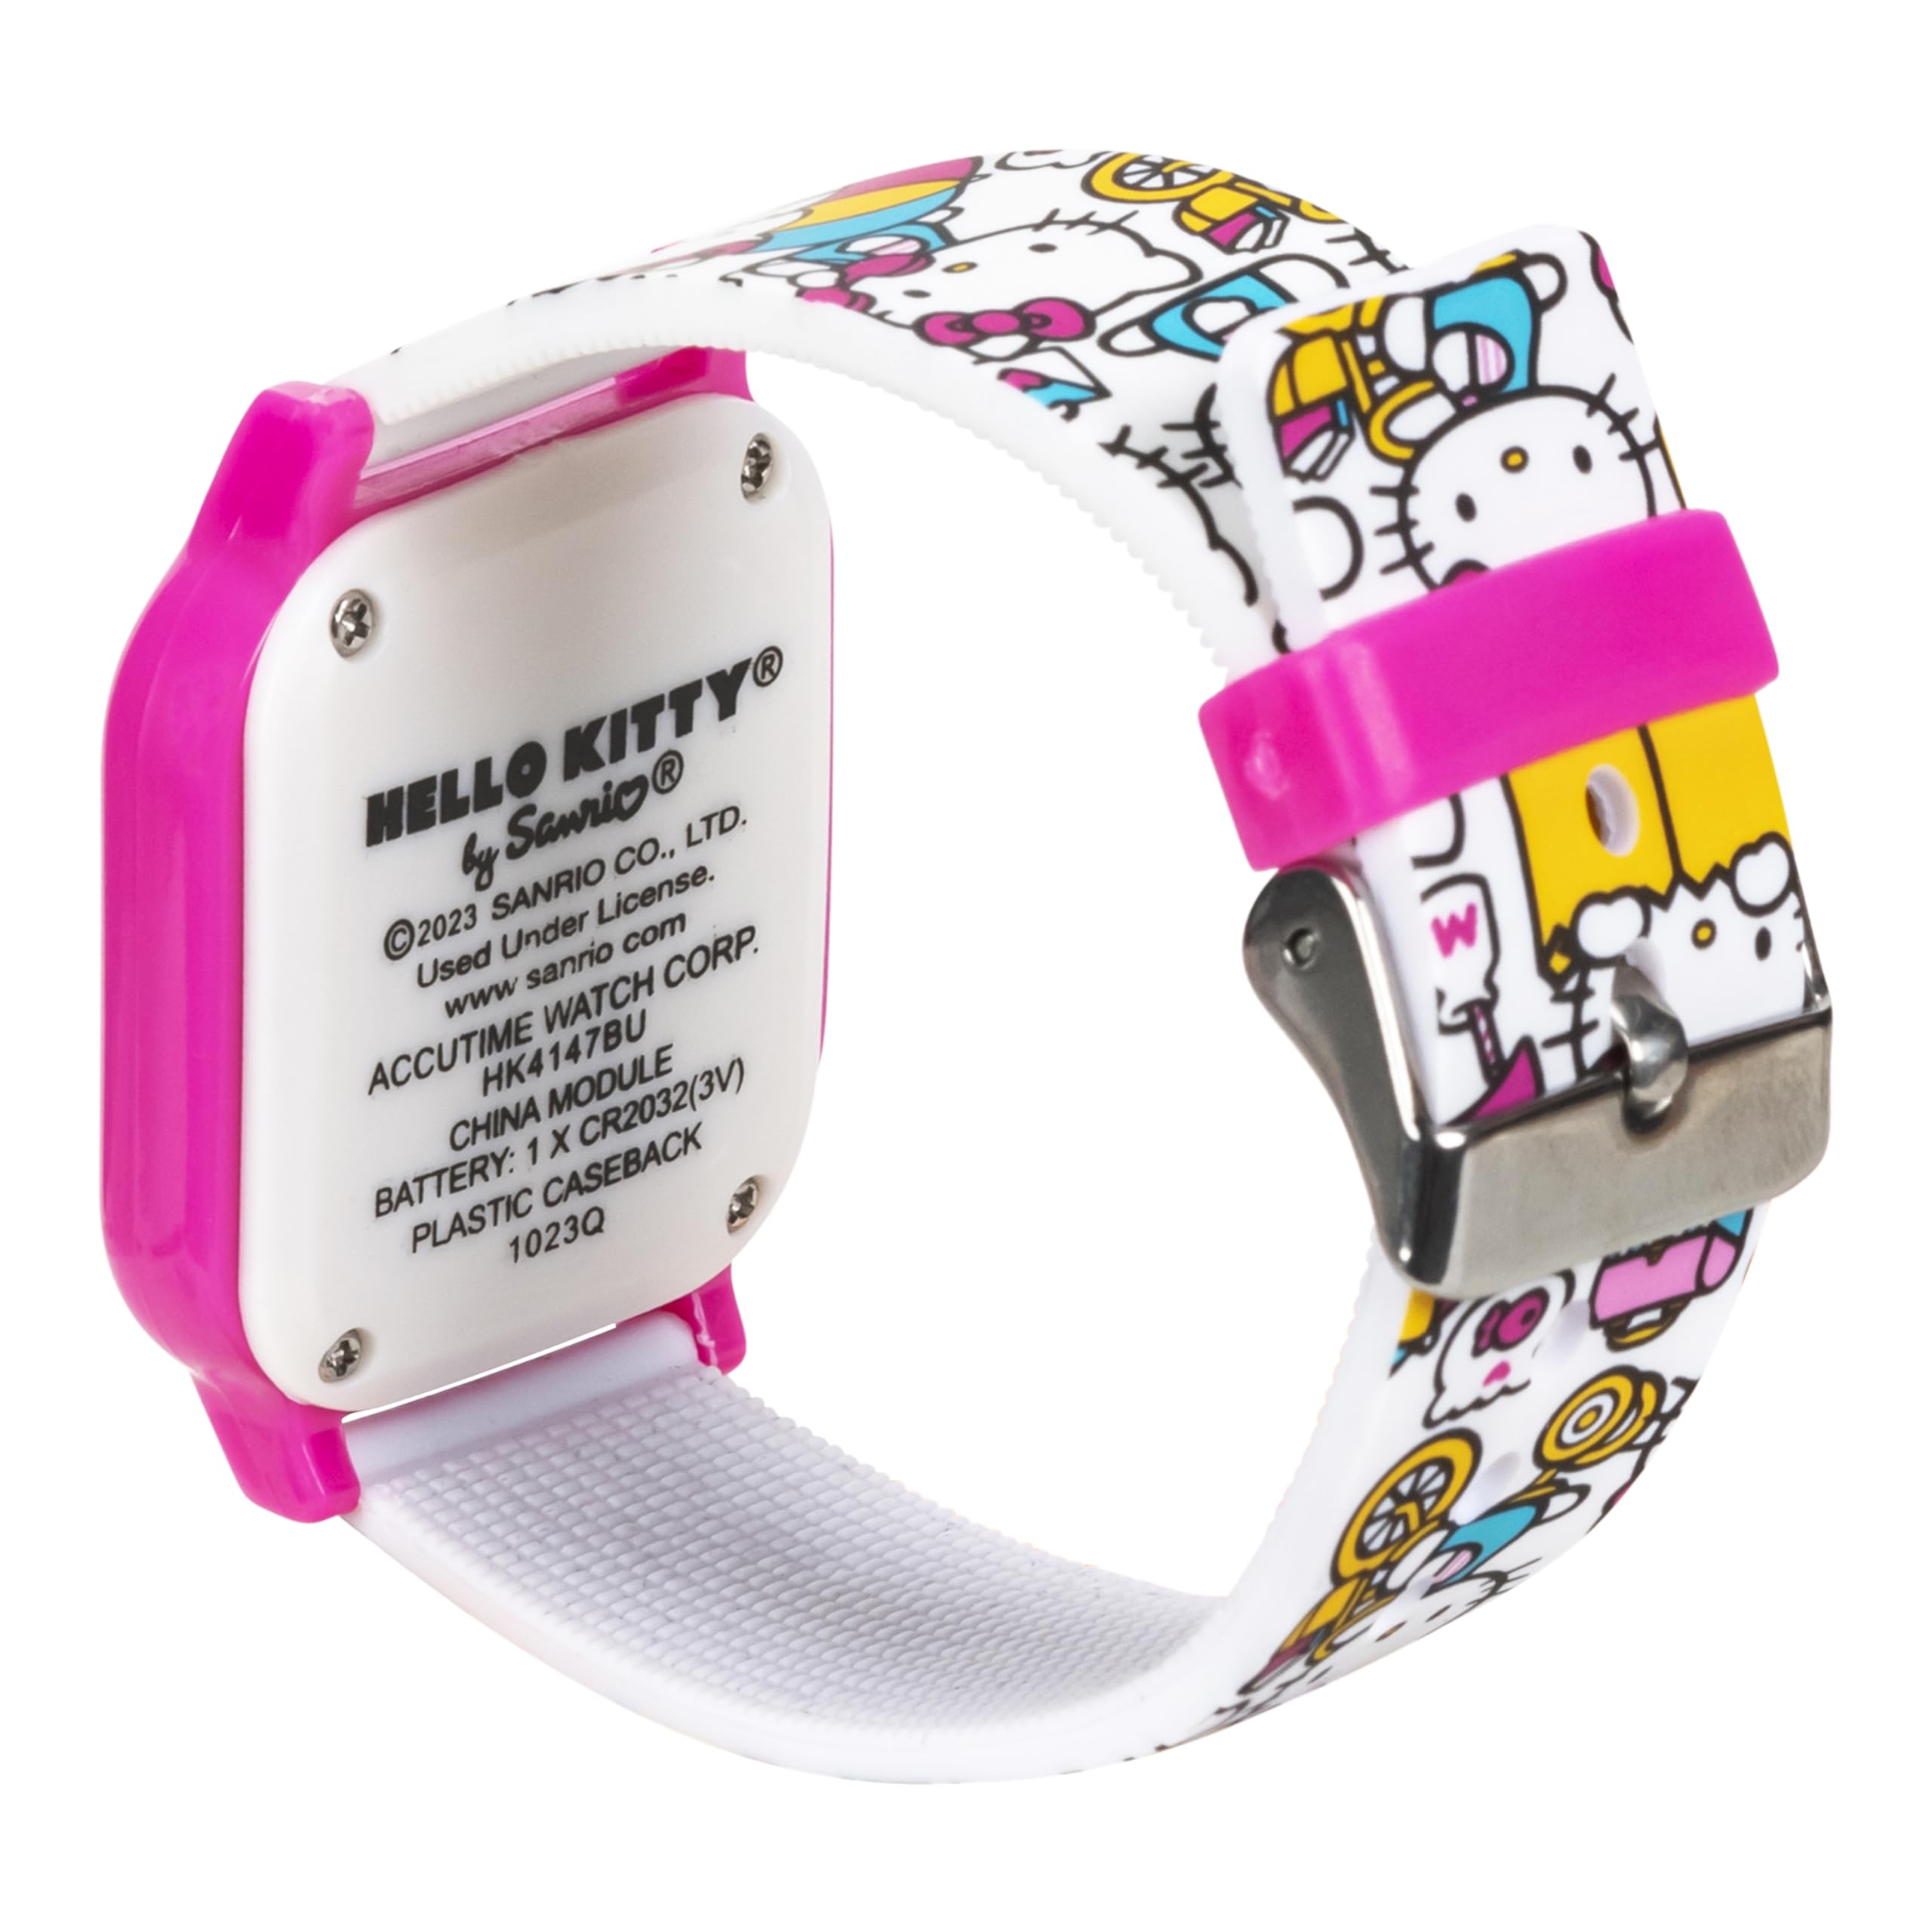 Accutime Hello Kitty Digital LED Quartz Kids Multicolor Watch for Girls with White Hello Kitty and Friends Band Strap (Model: HK4161AZ)